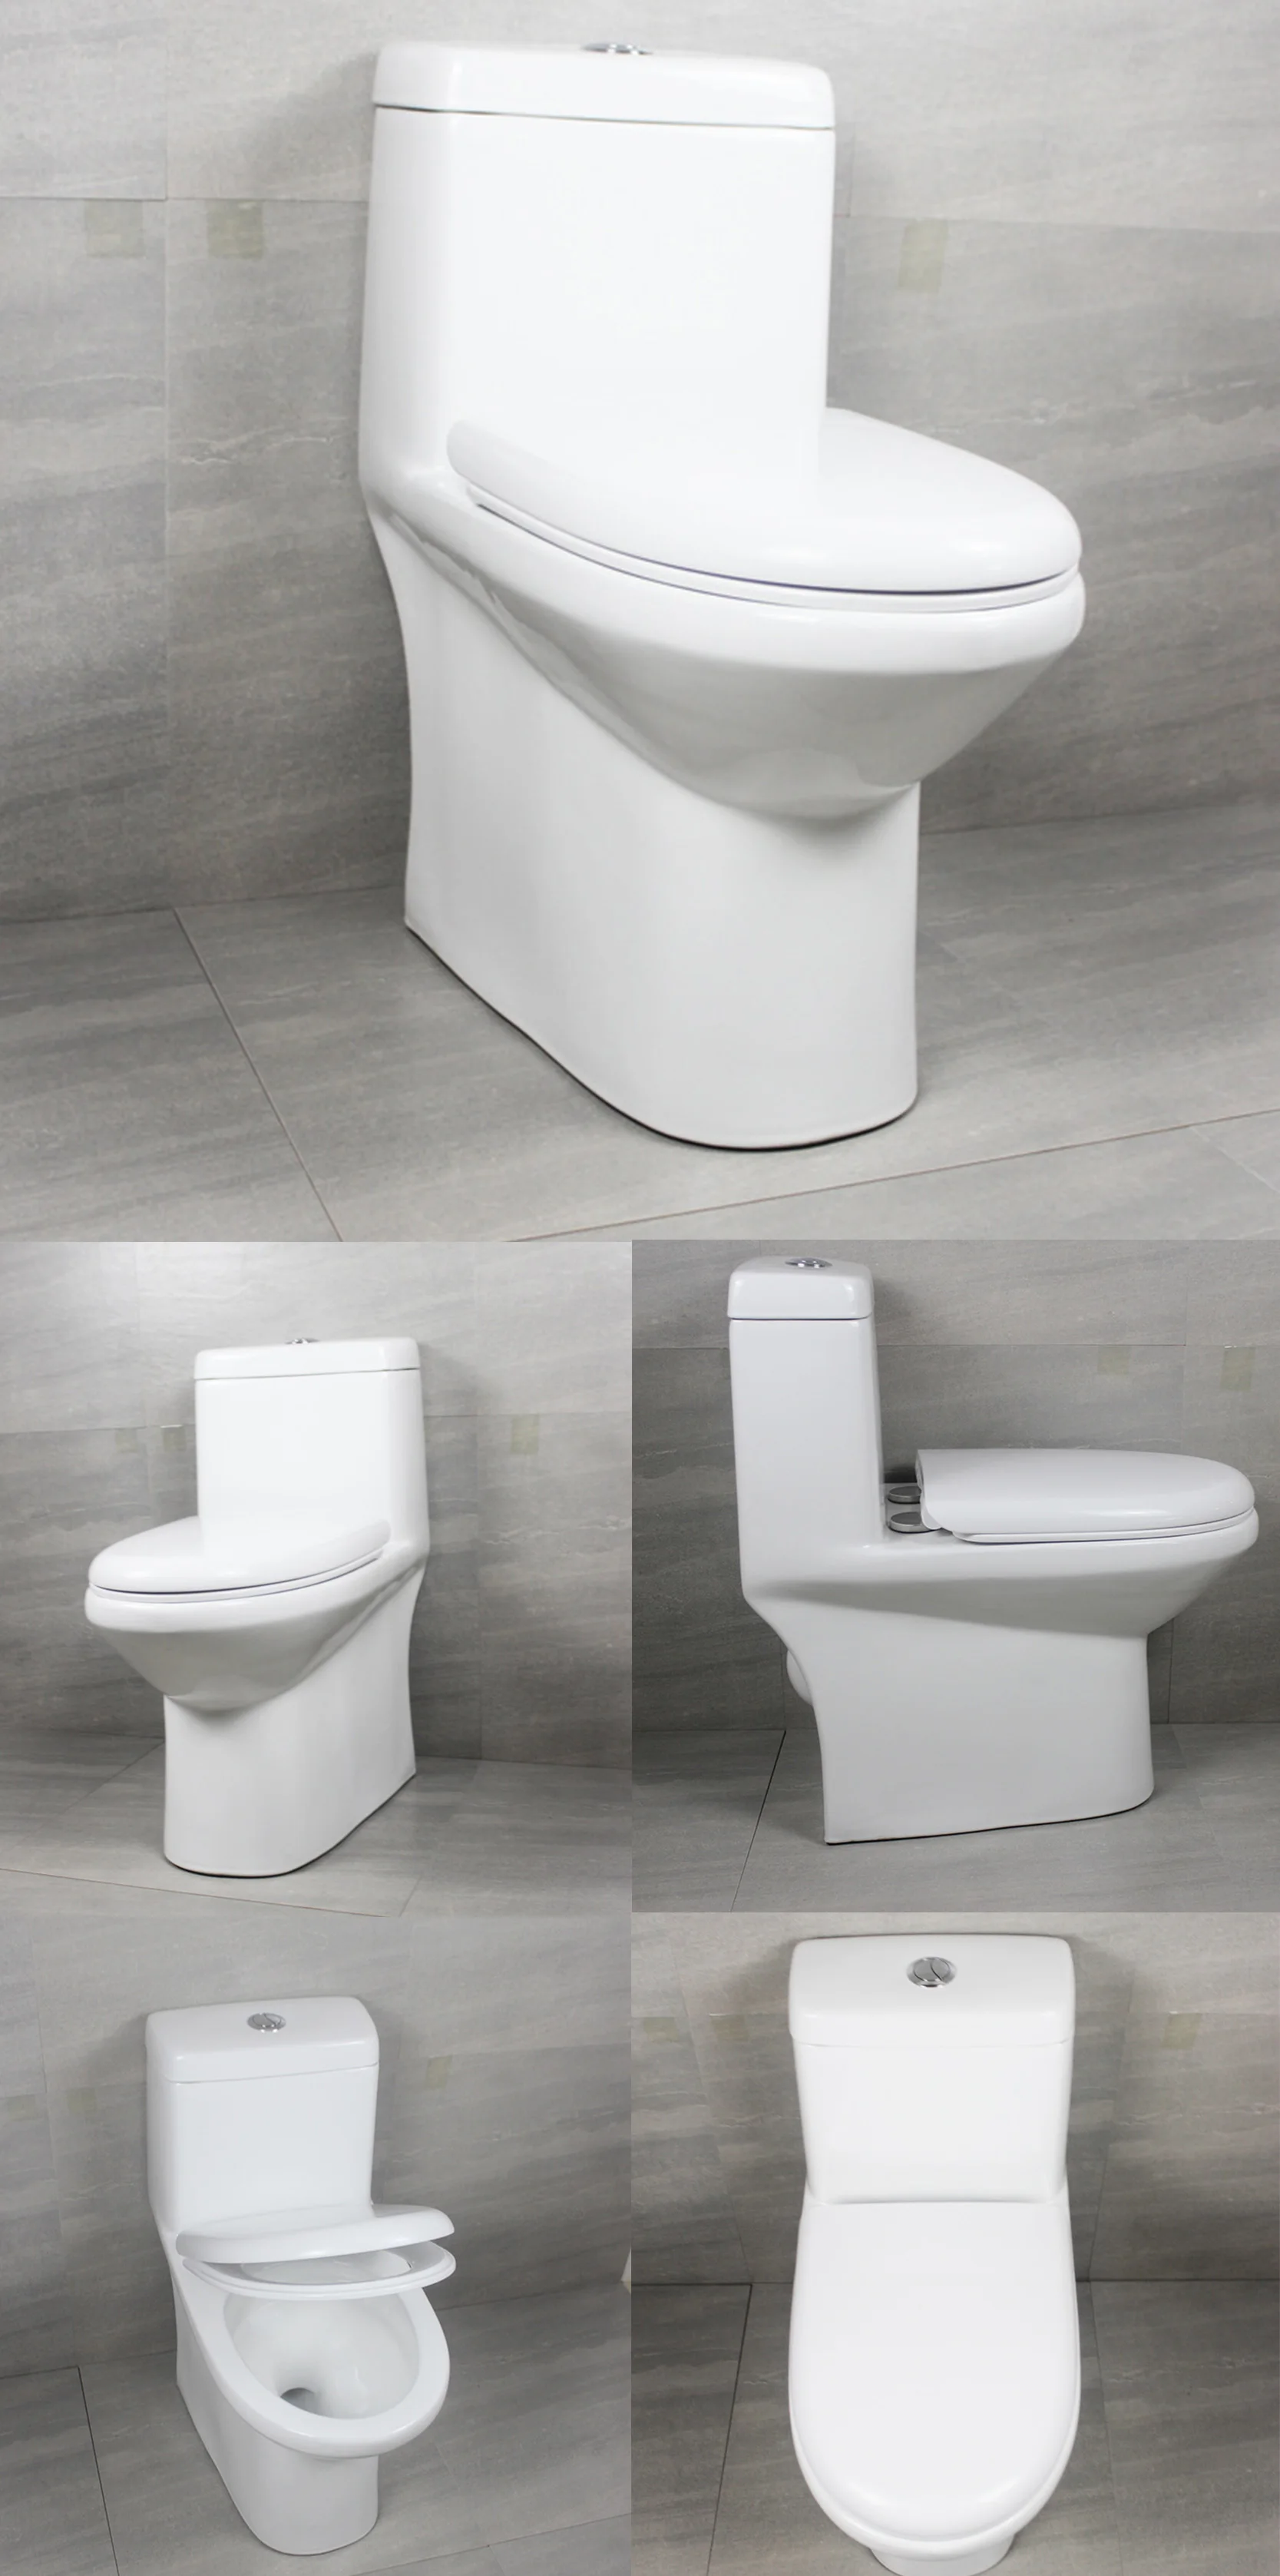 JOININ chaozhou bathroom ceramic toilet with high quality toilet tank fittings